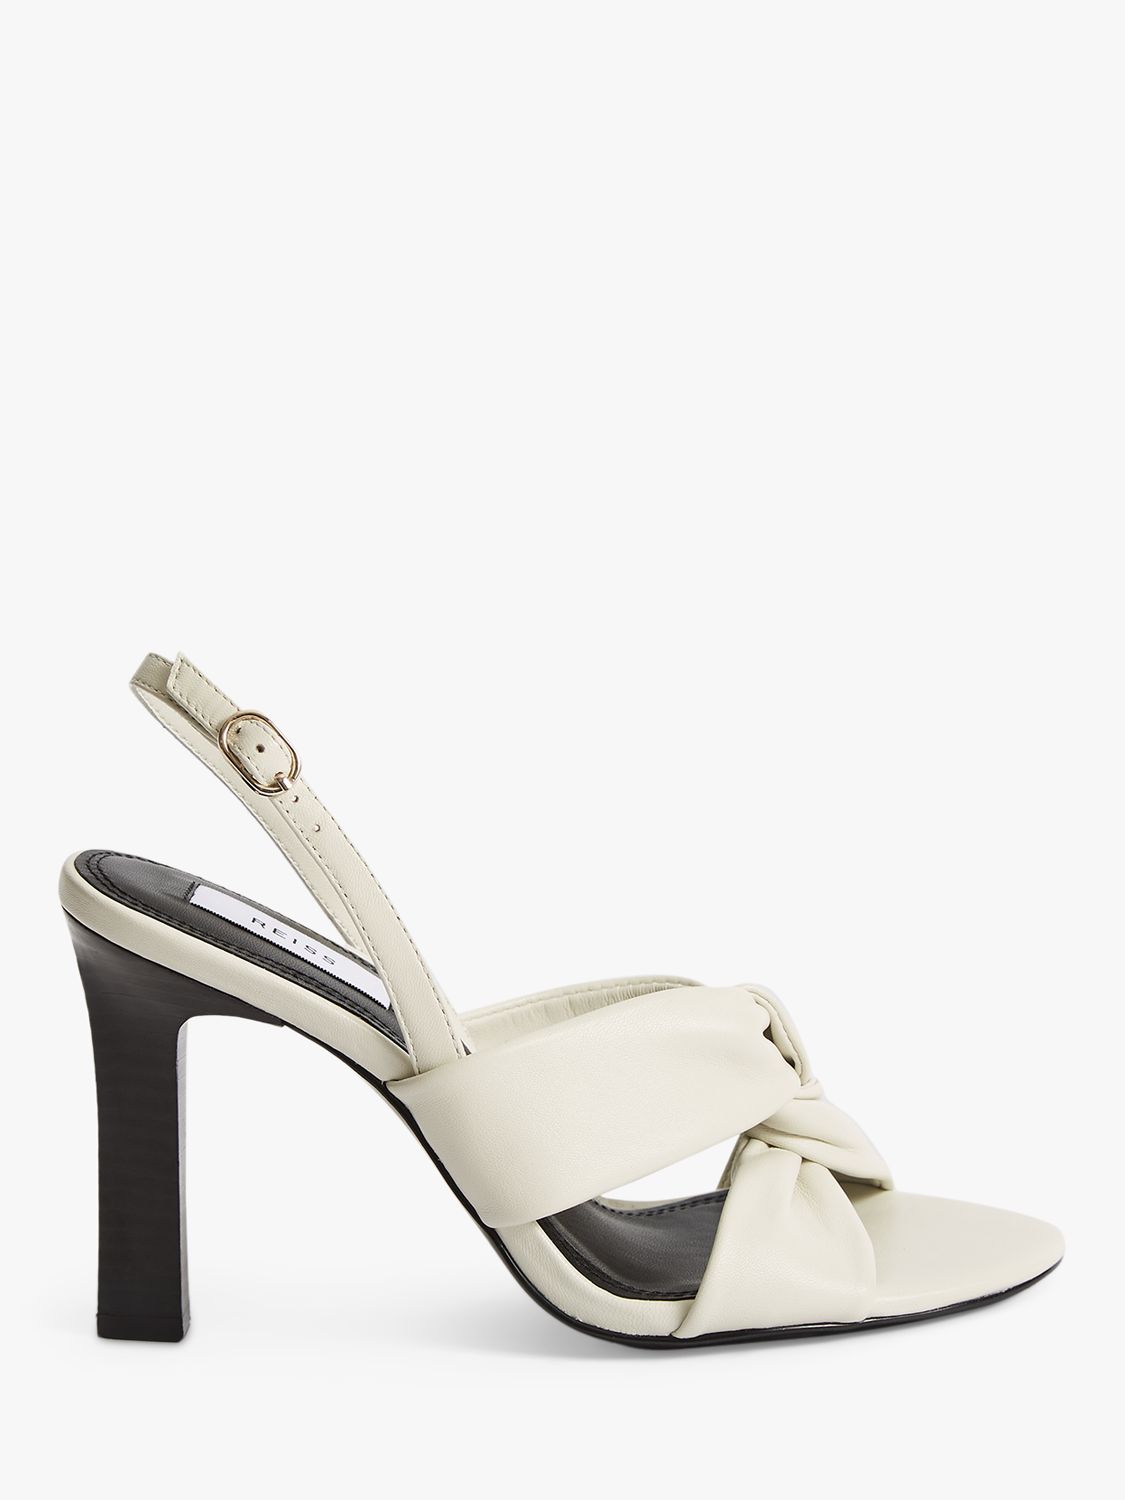 Reiss Phoebe Leather Twist Front Slingback Sandals, Off White at John ...